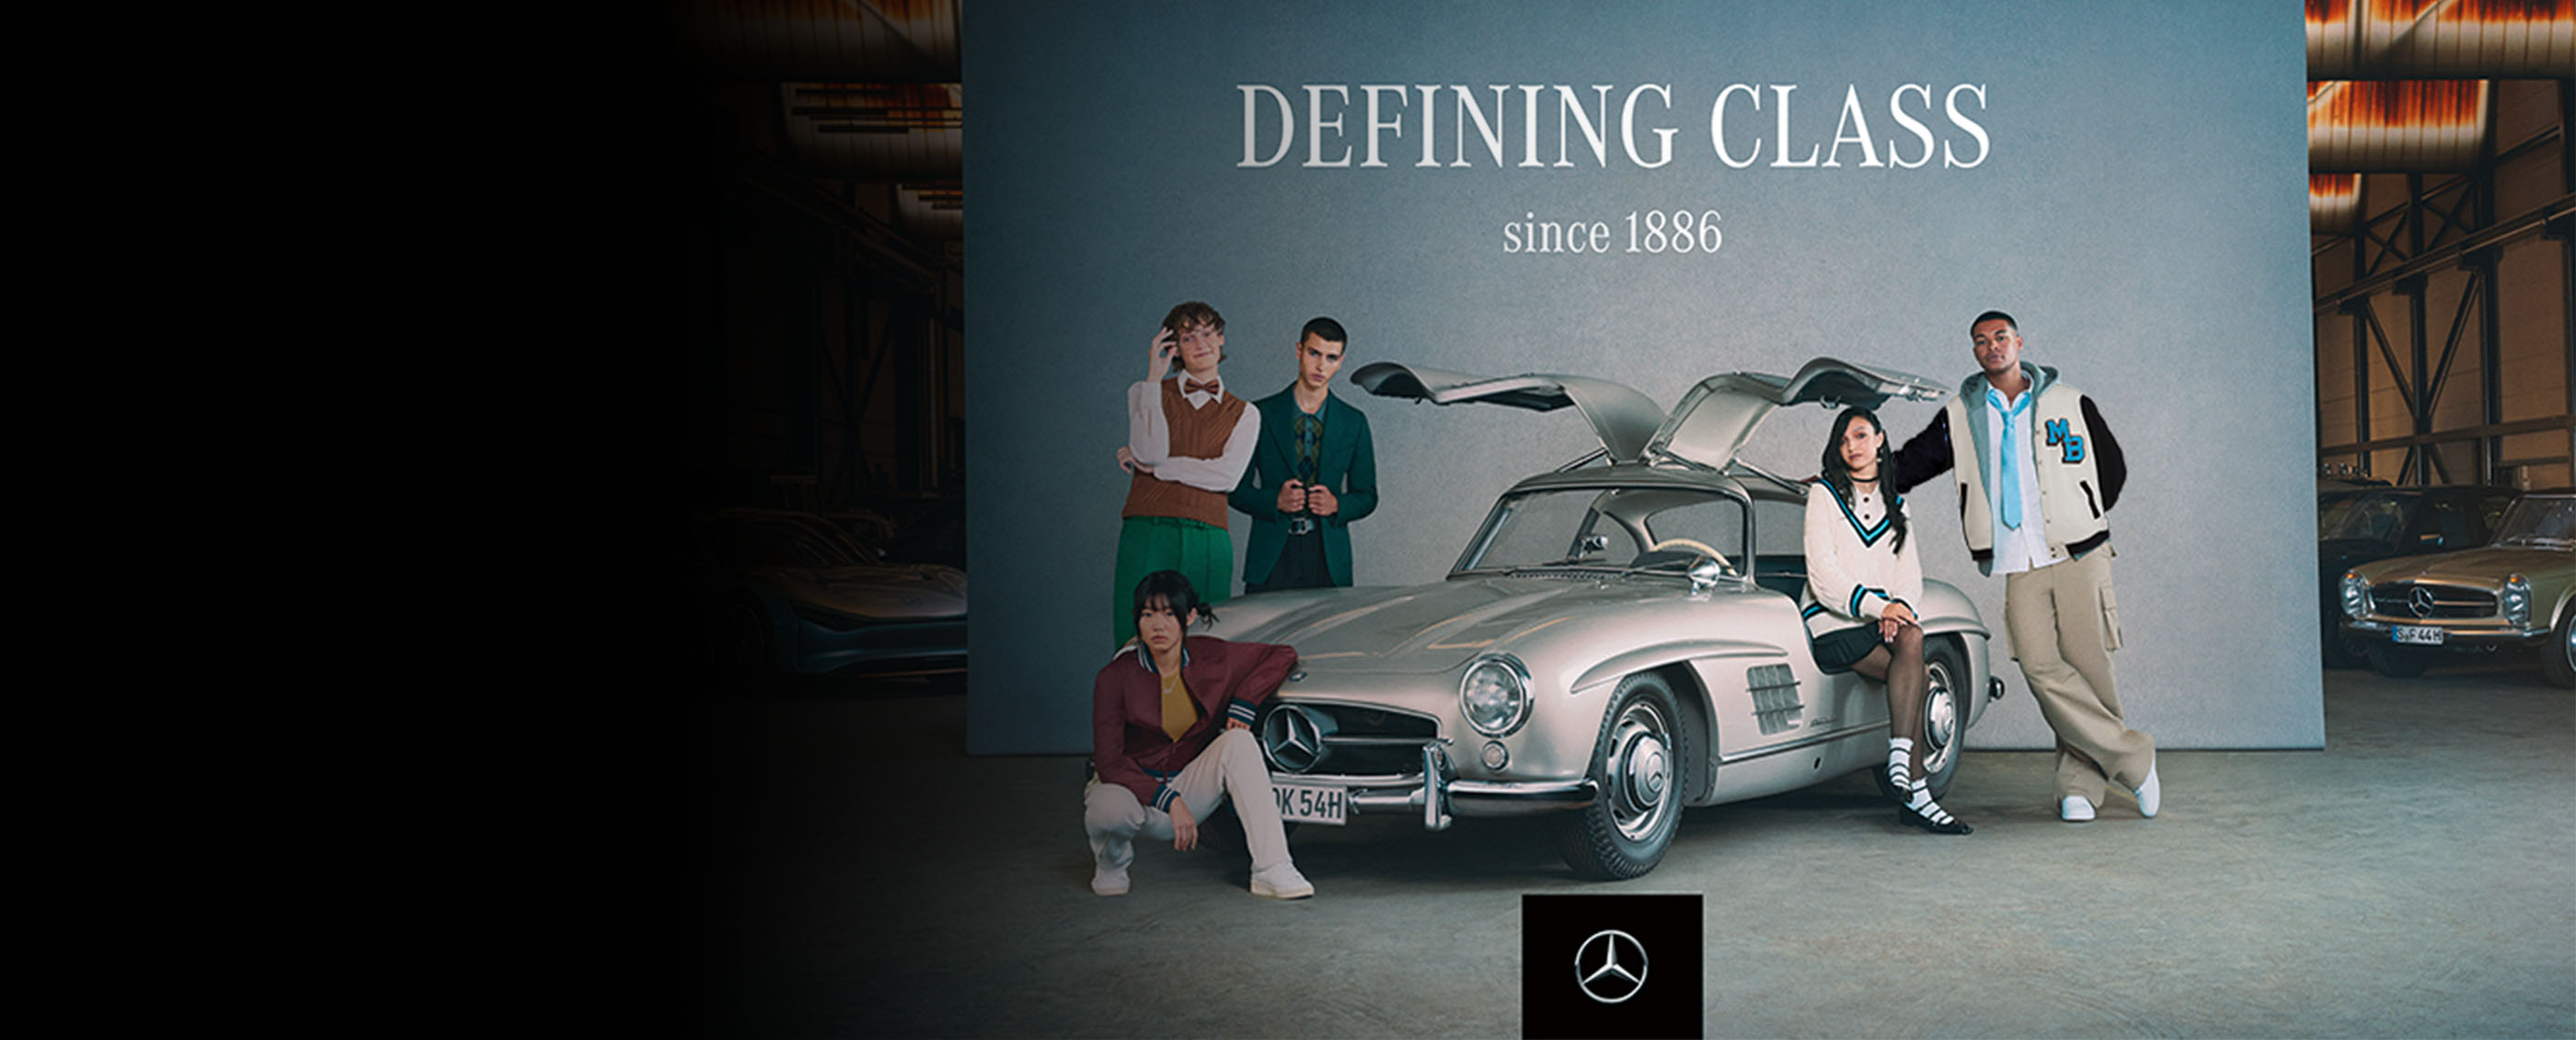 Canvas And Leather Duffel  Mercedes-Benz Lifestyle Collection